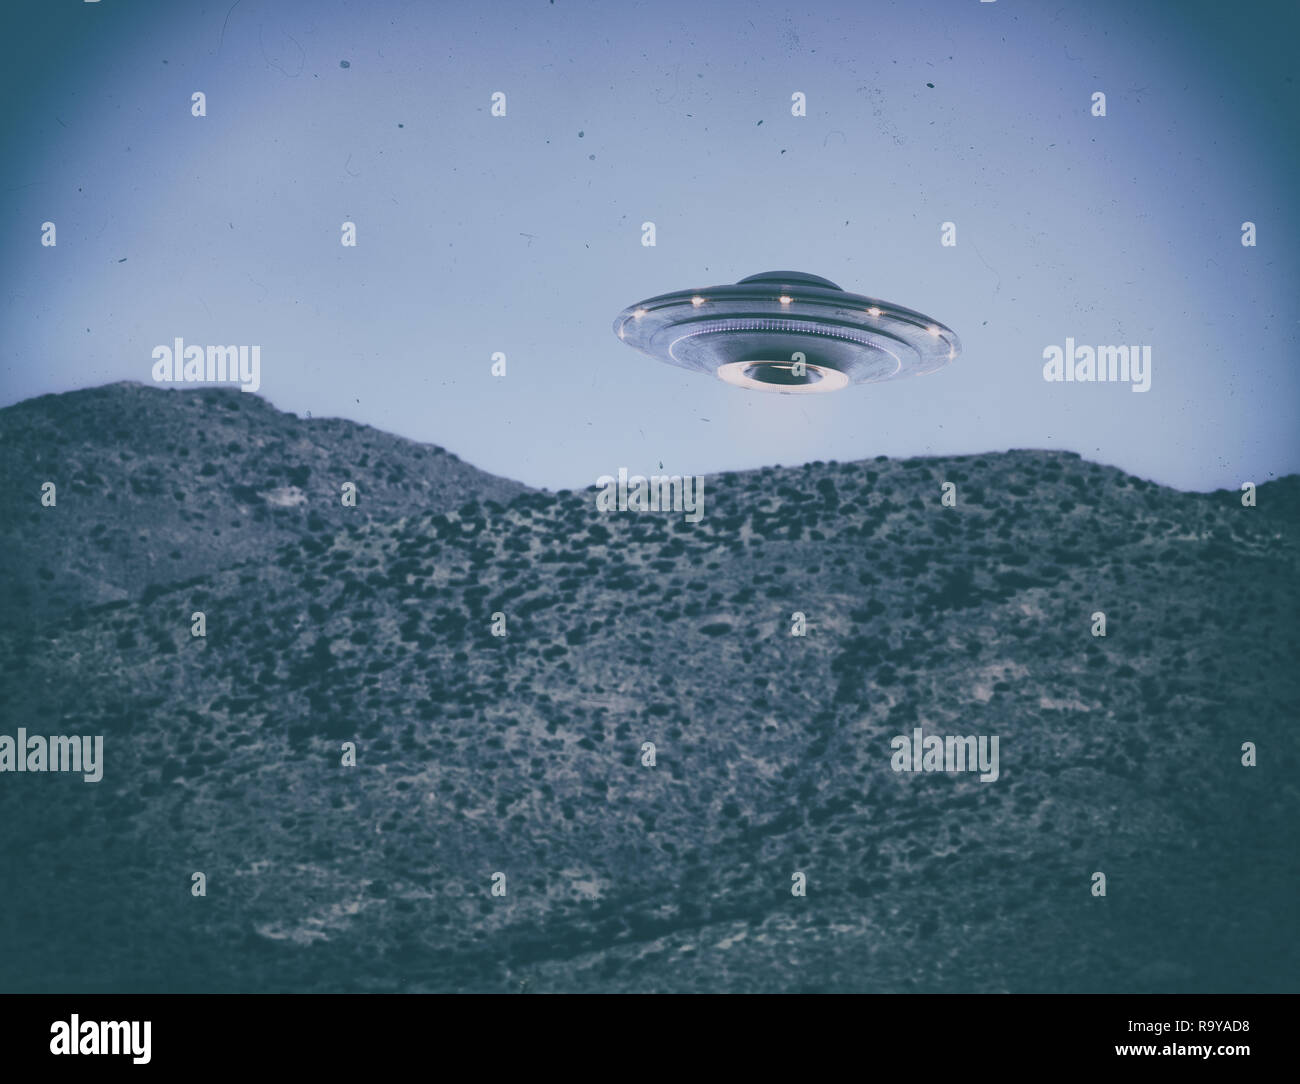 Unidentified flying object UFO. Old style photo with high ISO noise and dirt with scratches over time. Clipping path included. Stock Photo